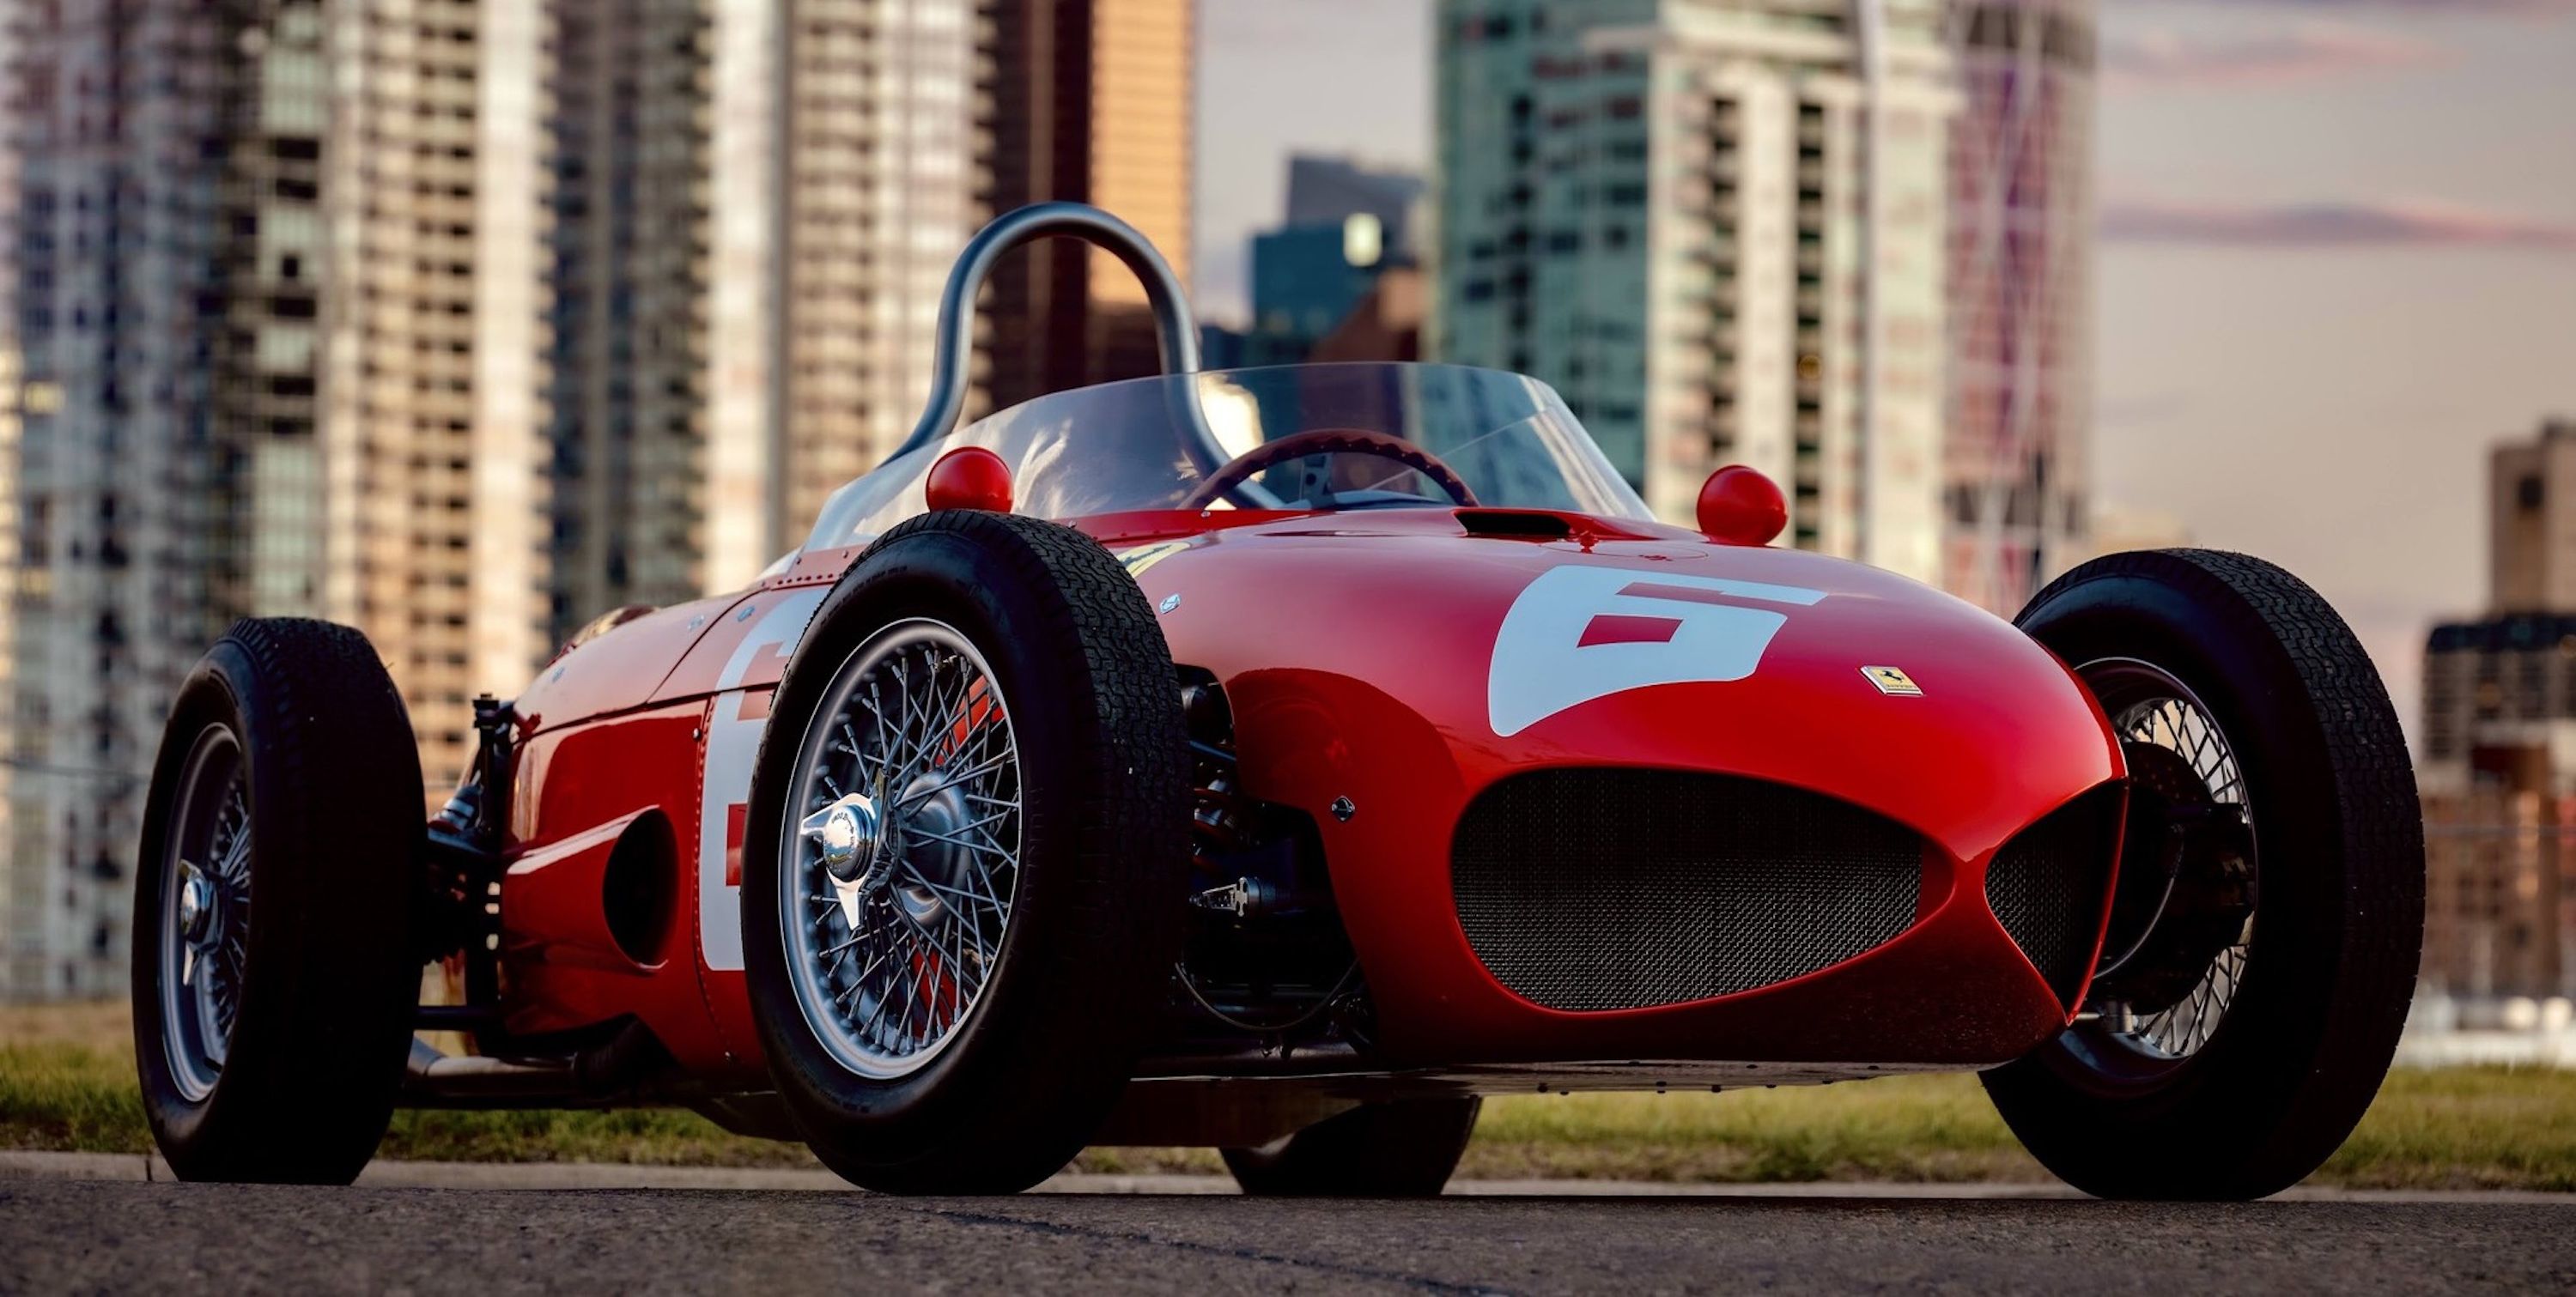 The Ferrari 156 Sharknose F1 Recreation a Dude Built in His Garage Is For Sale